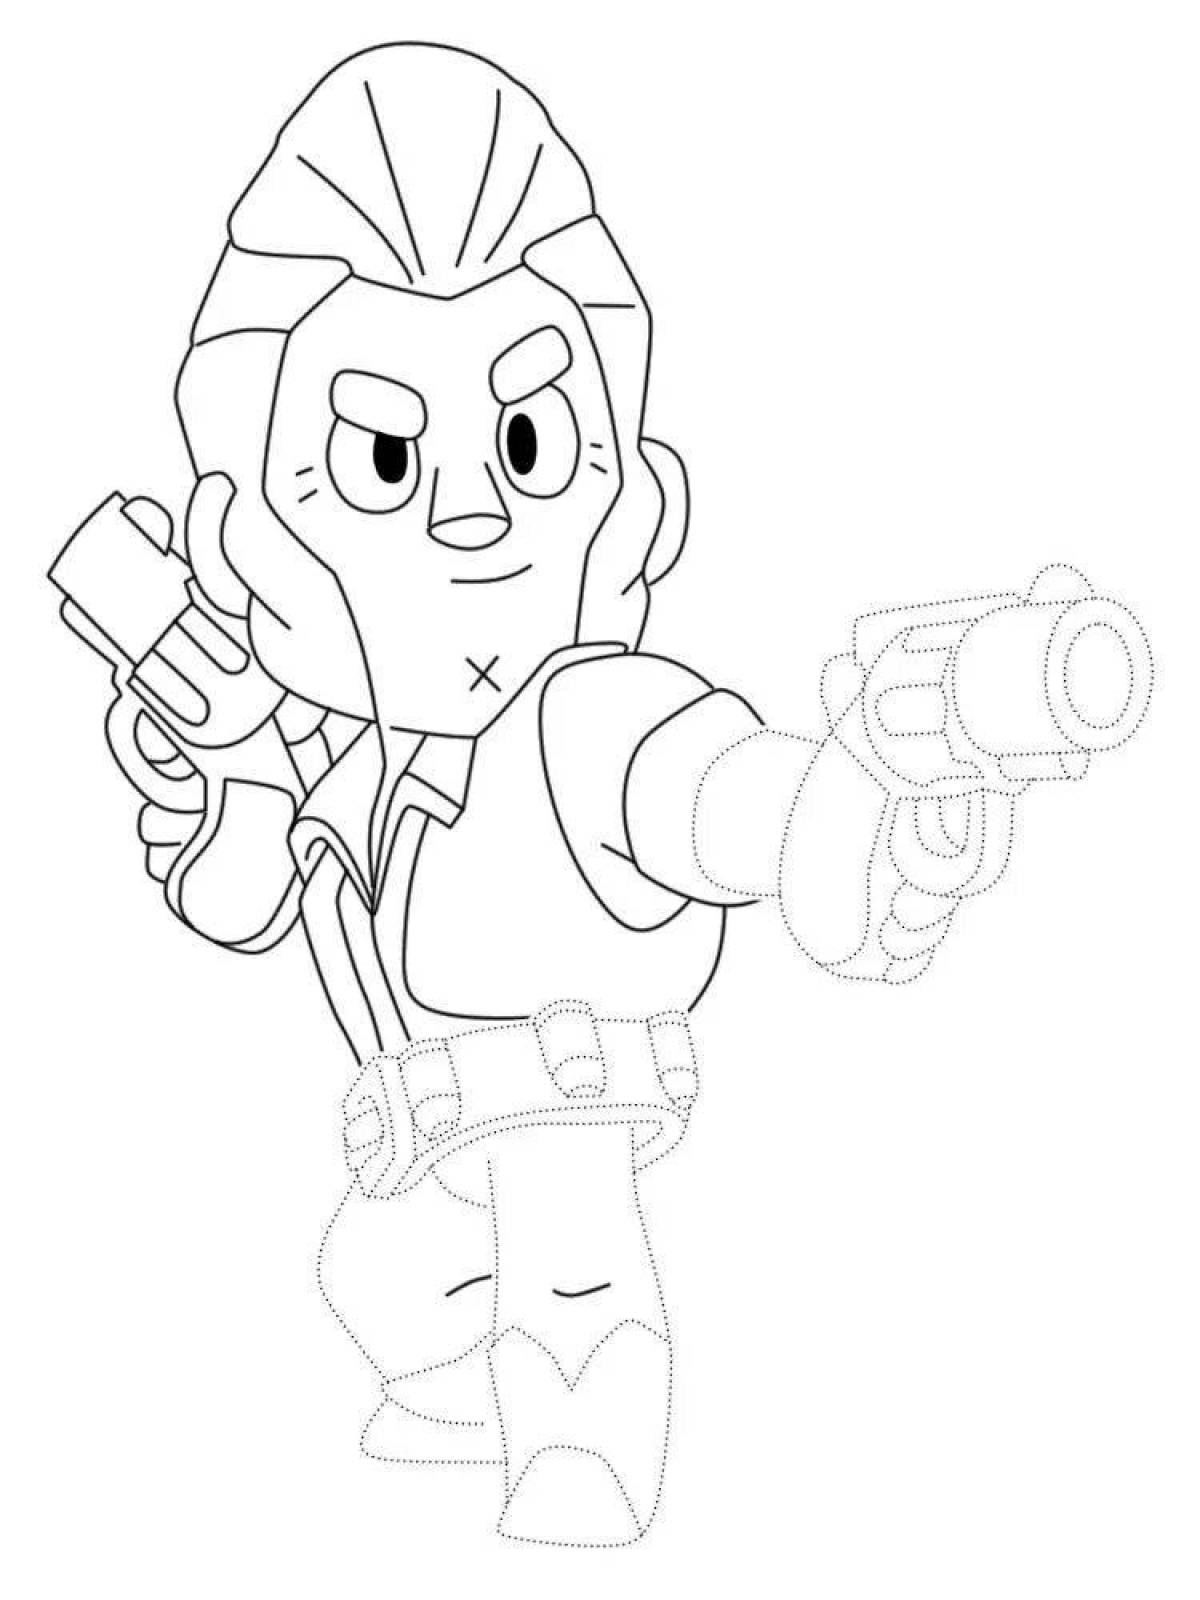 Incredible bravo stars colt coloring page